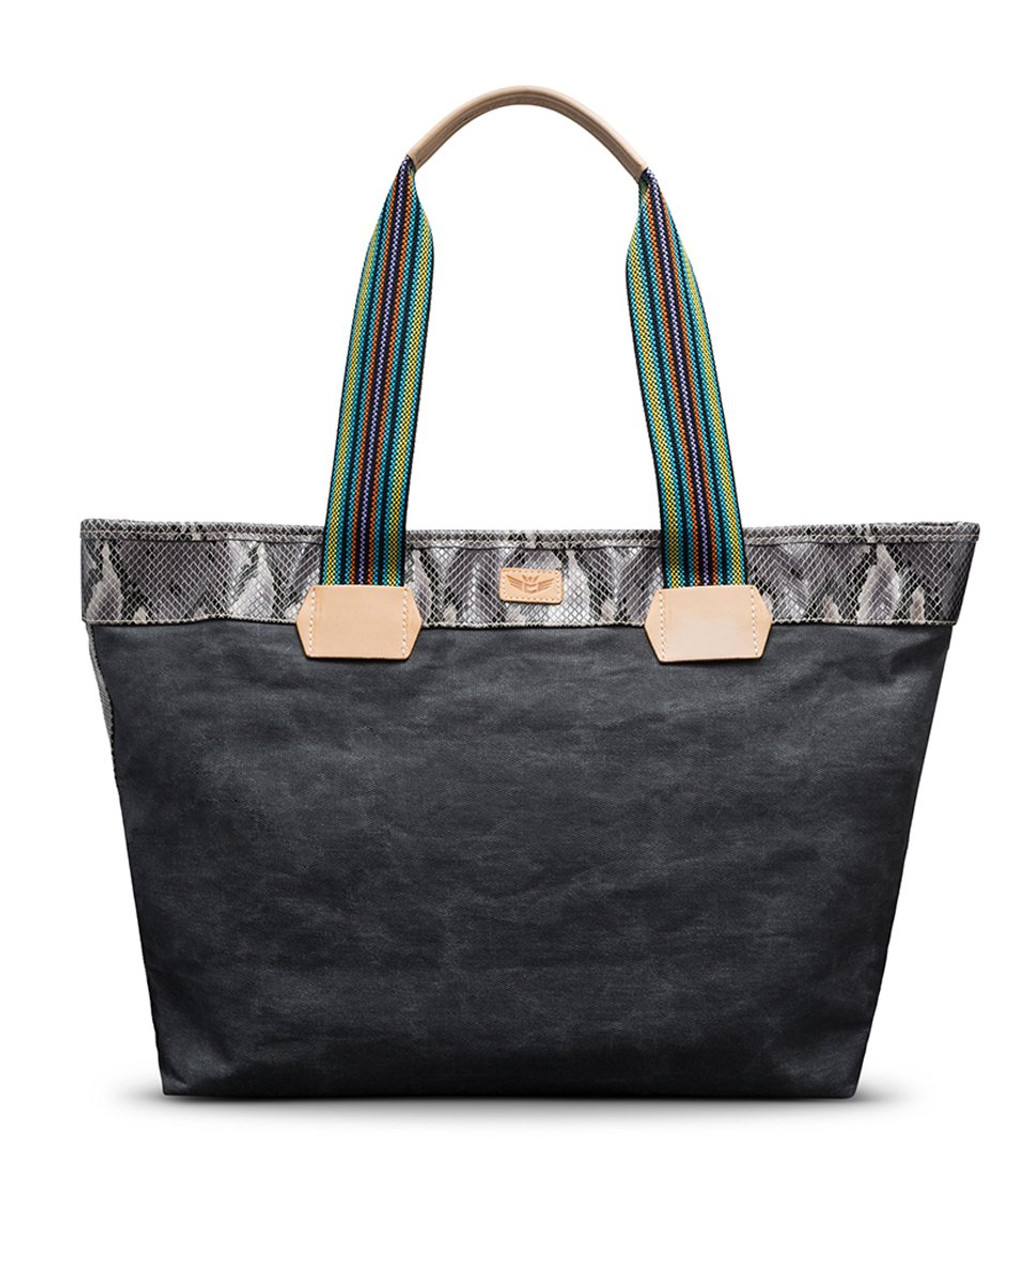 Consuela Bags Flynn Zipper Tote by Consuela|The Lamp Stand